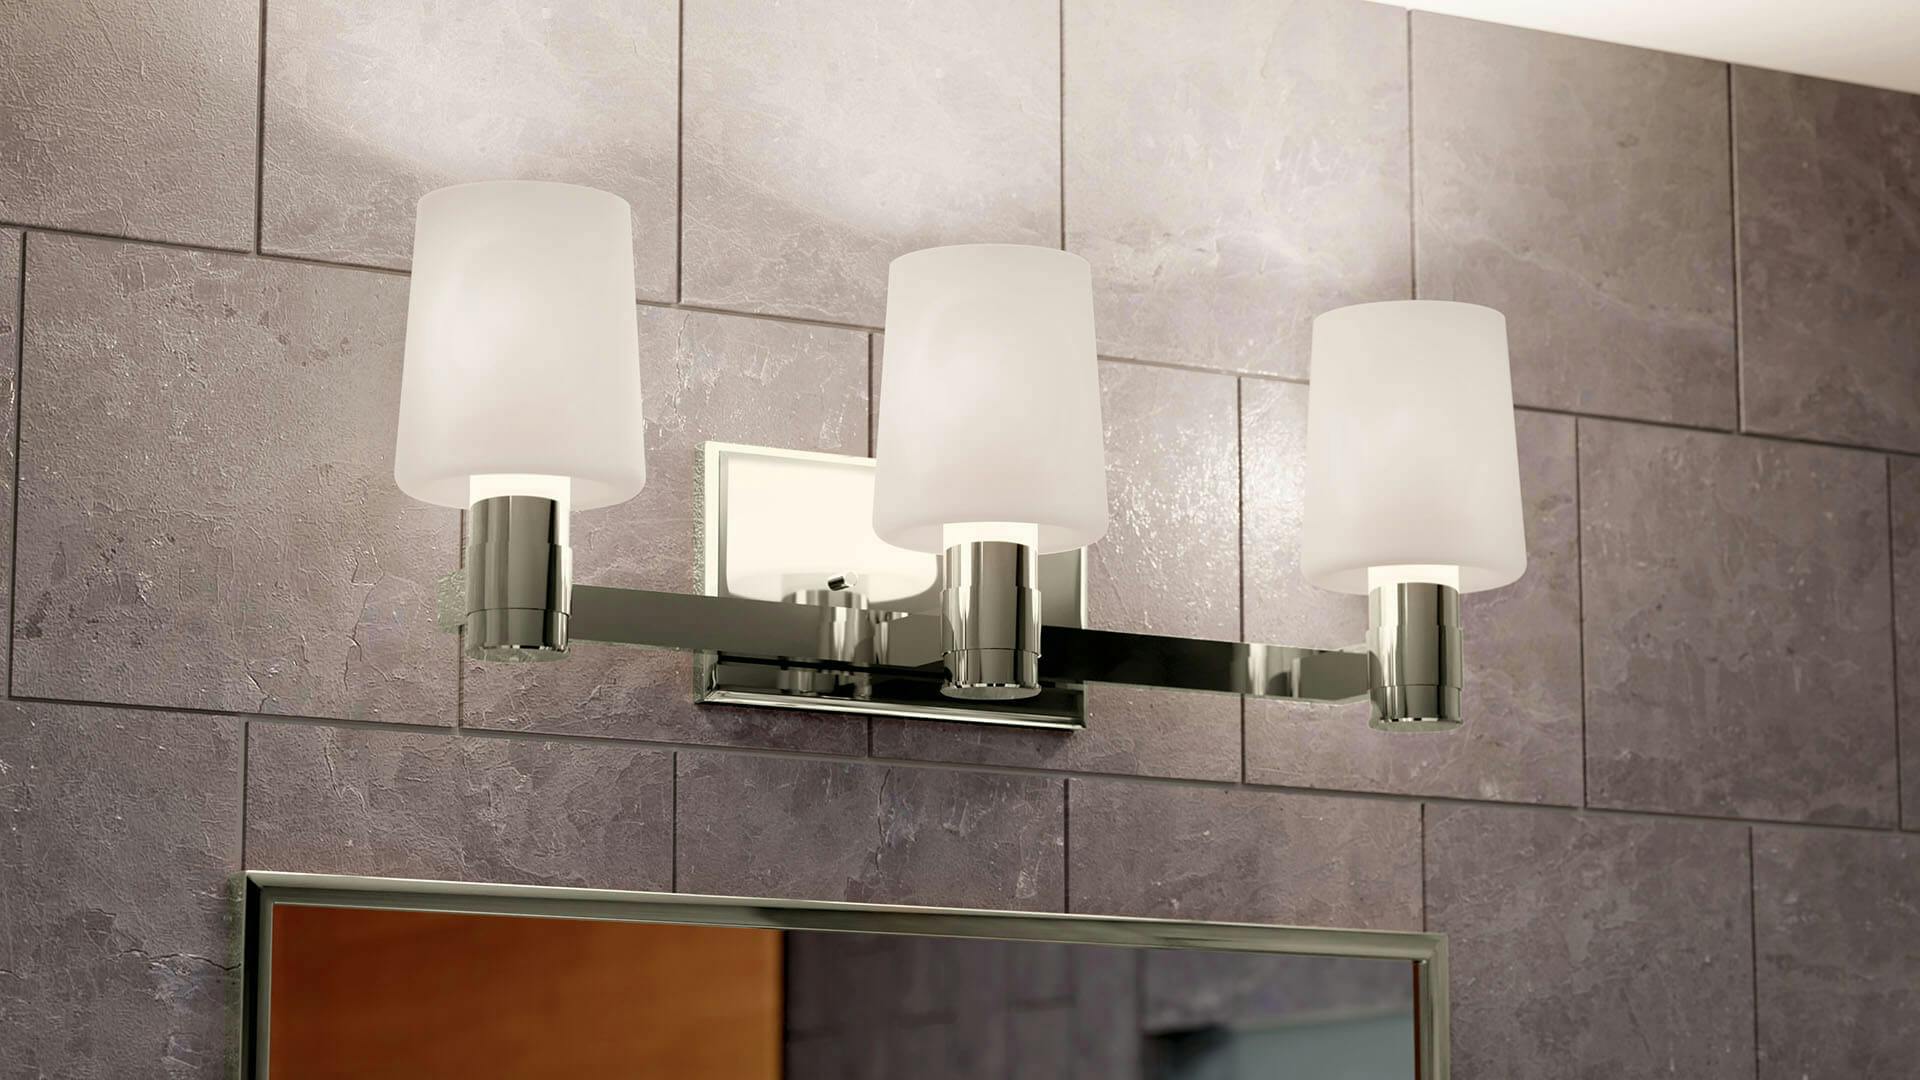 Close up of a three light adani wall sconce vanity light over a bathroom mirror.